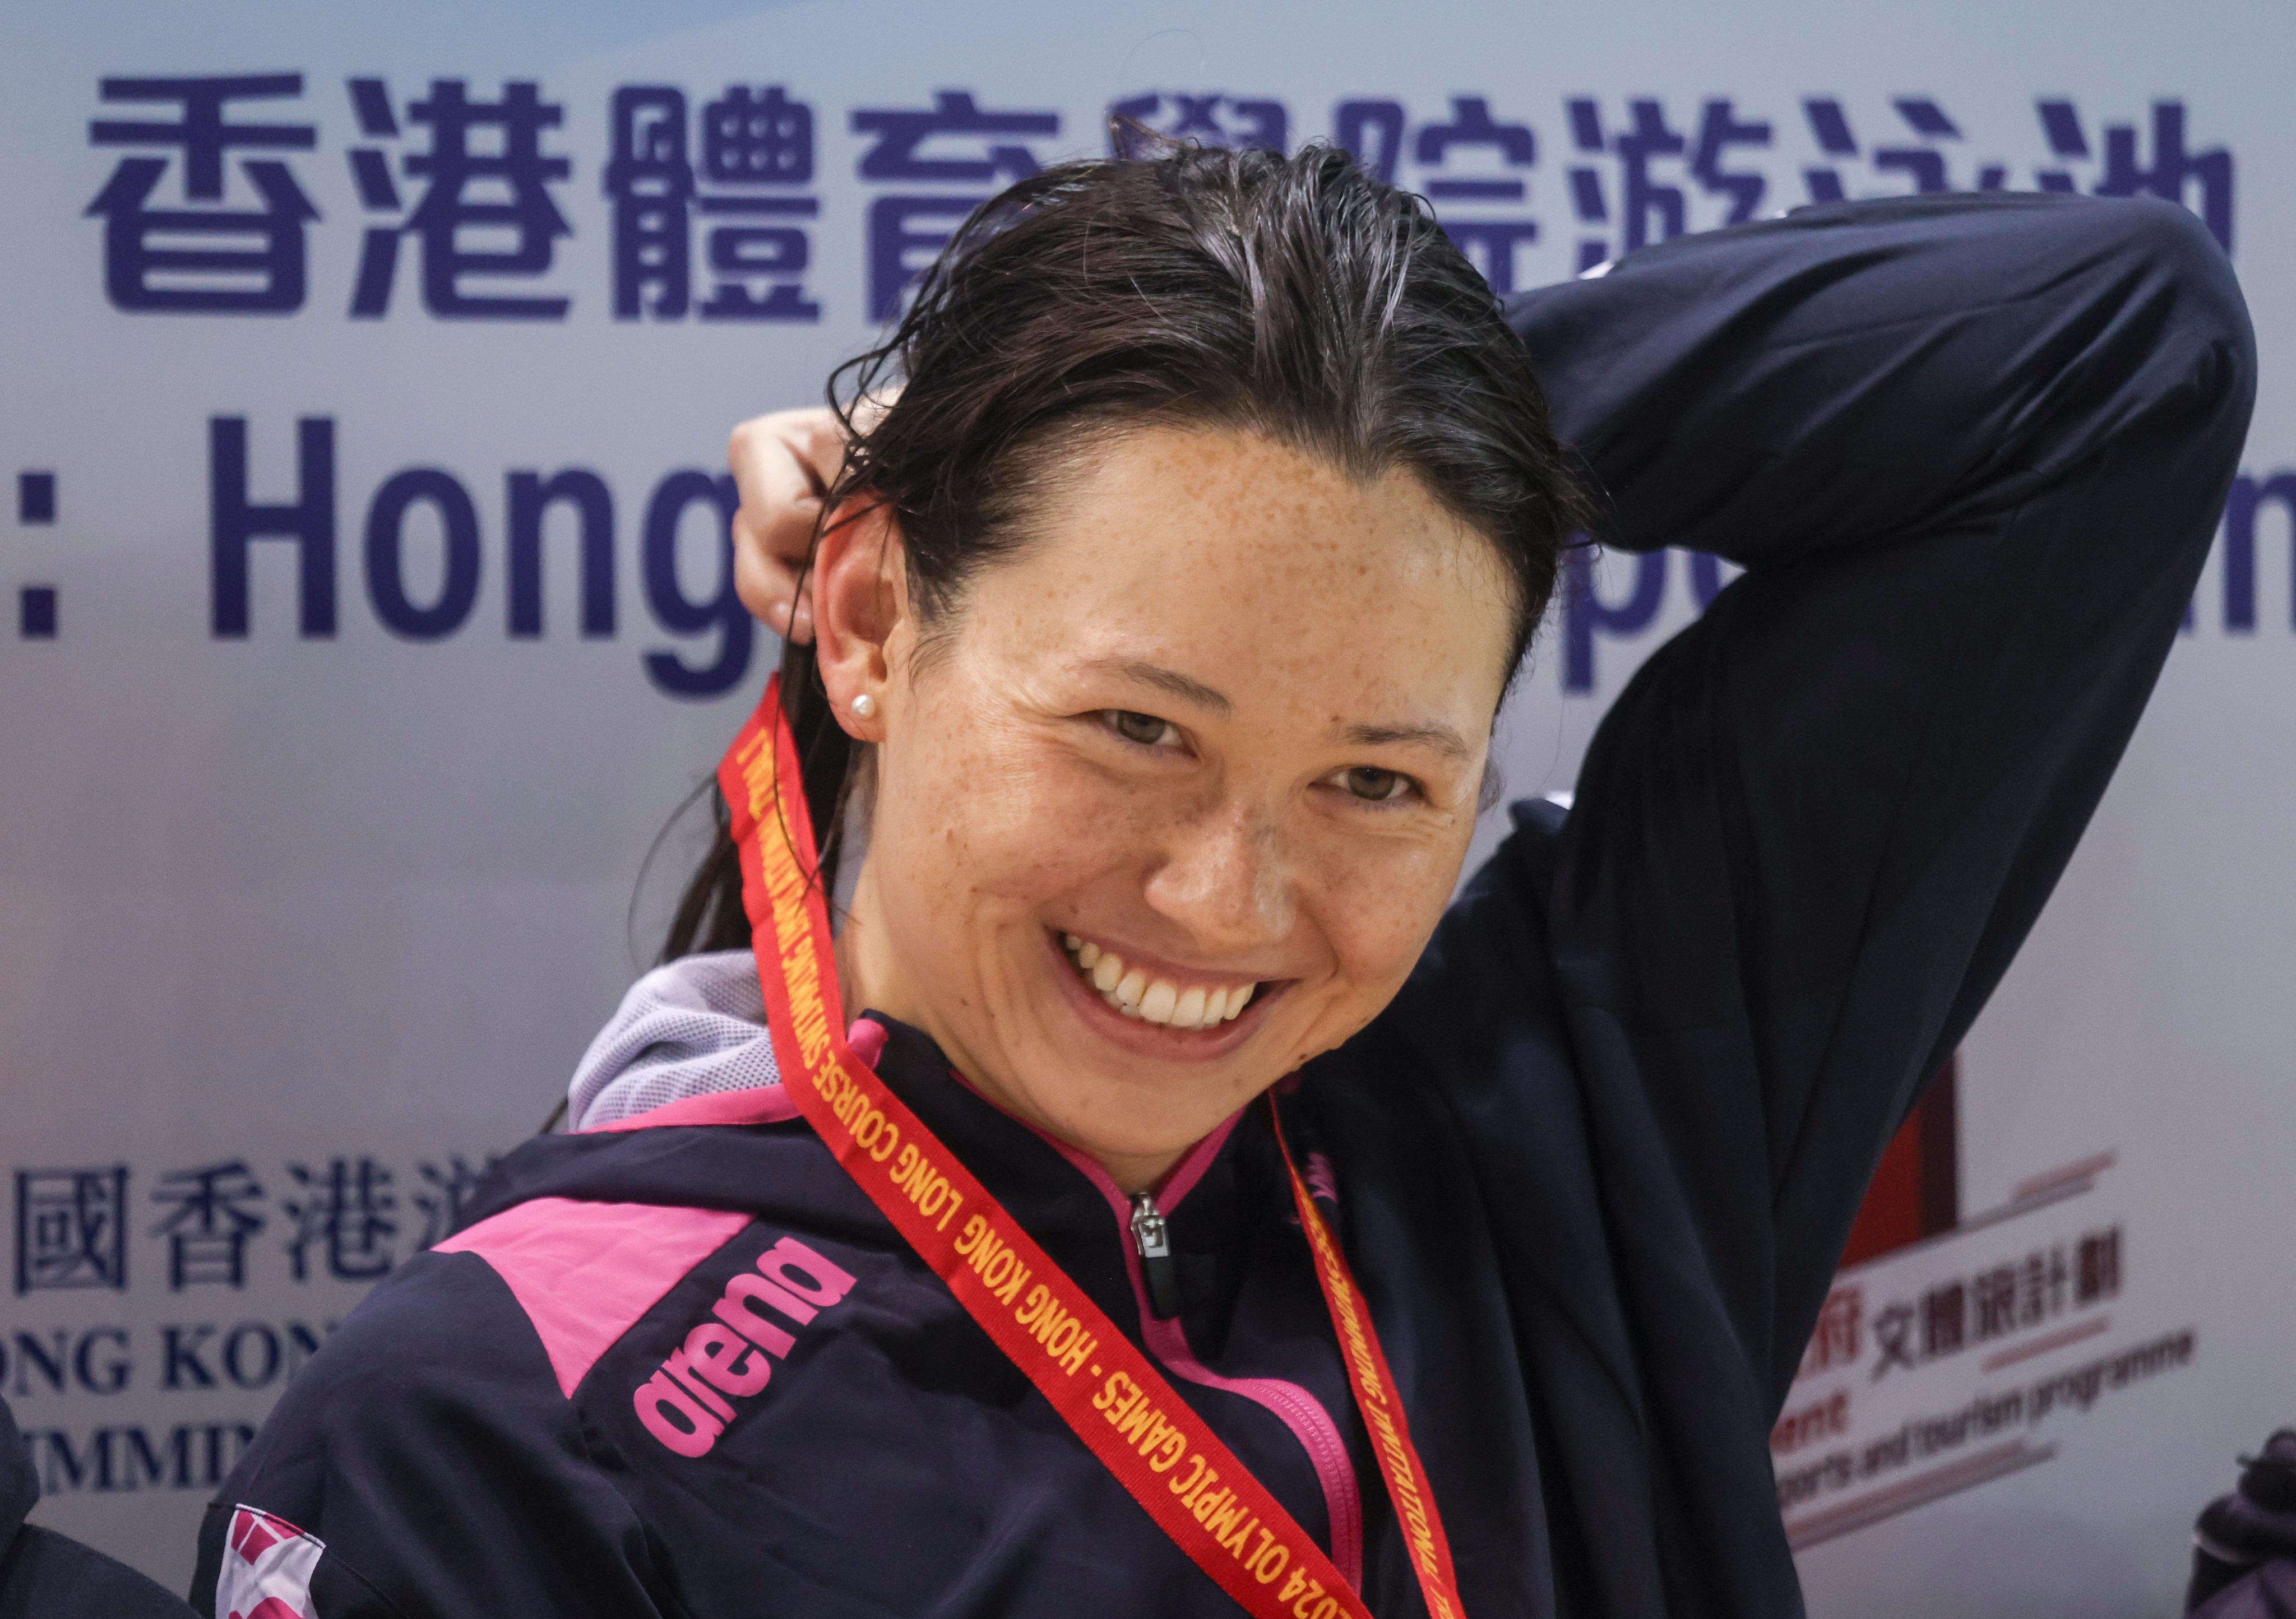 Siobhan Haughey broke the Hong Kong 800m long-course record on Saturday having never swum the event before. Photo: Jonathan Wong